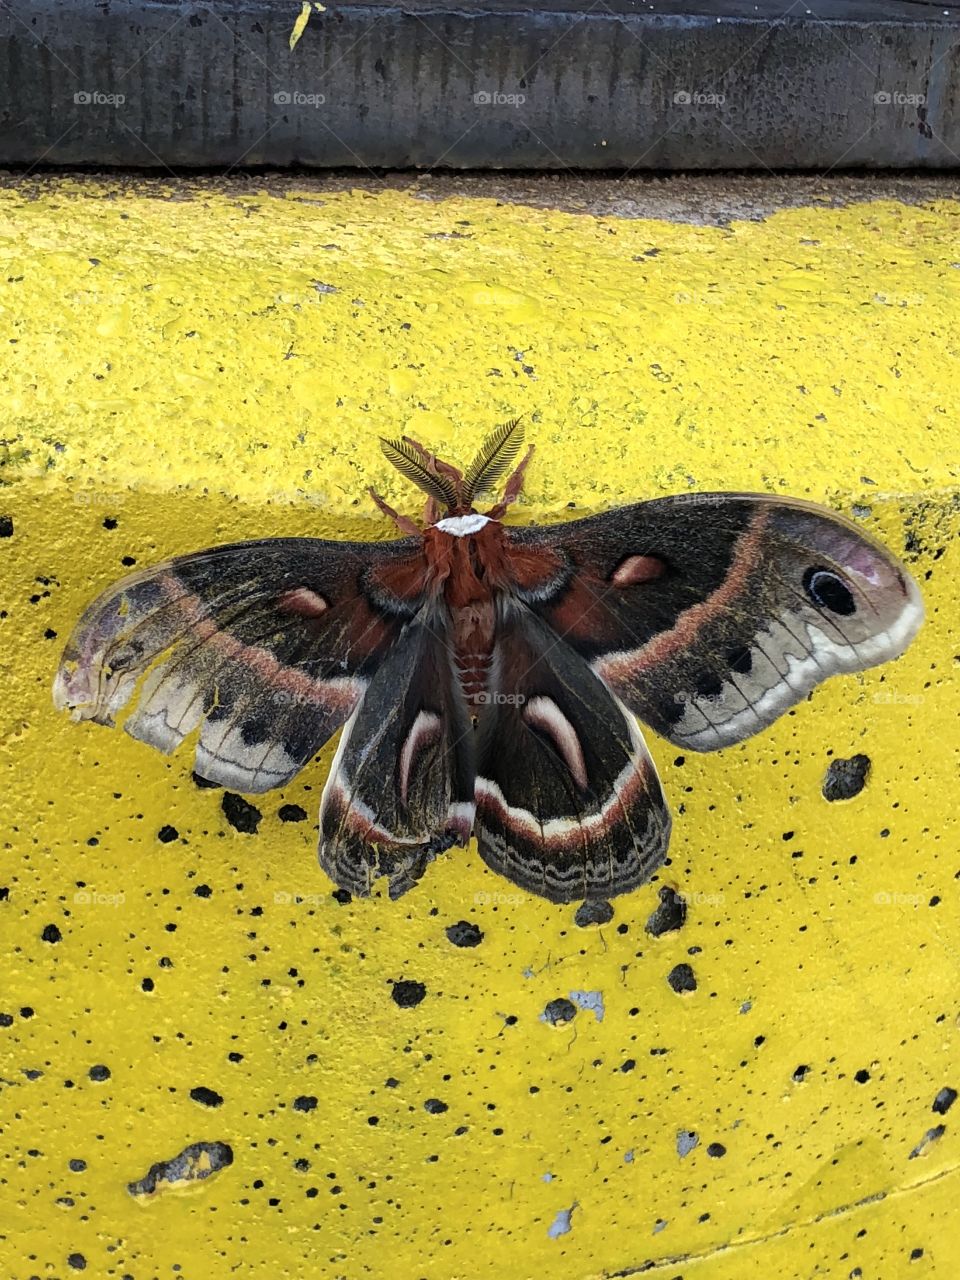 A beautiful Silk Moth spreading its wings to show me its stunning design. Taken in Eau Claire, WI. 